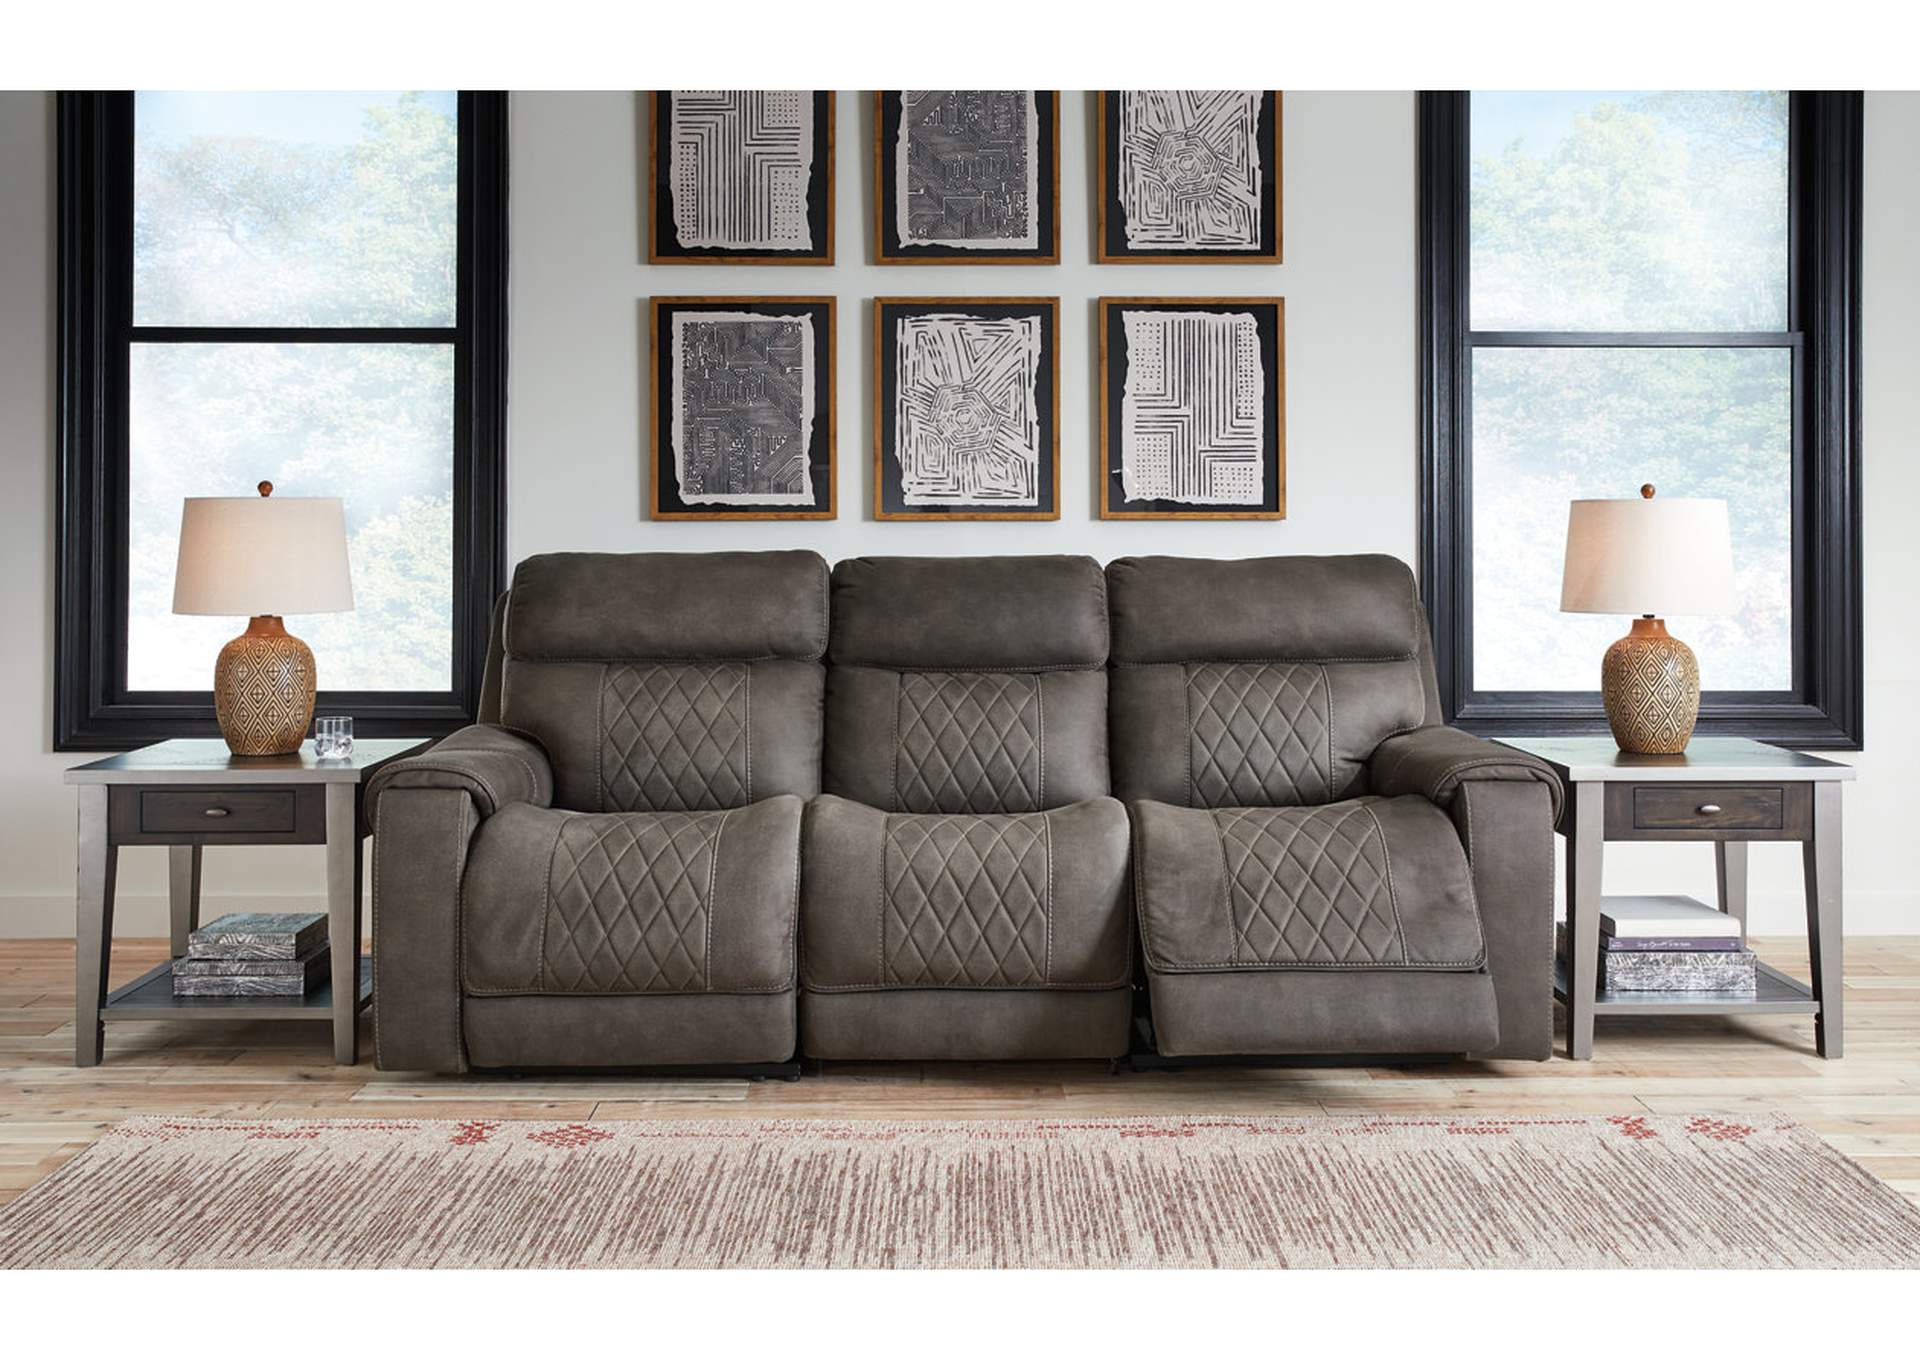 Hoopster 3-Piece Power Reclining Sofa,Signature Design By Ashley